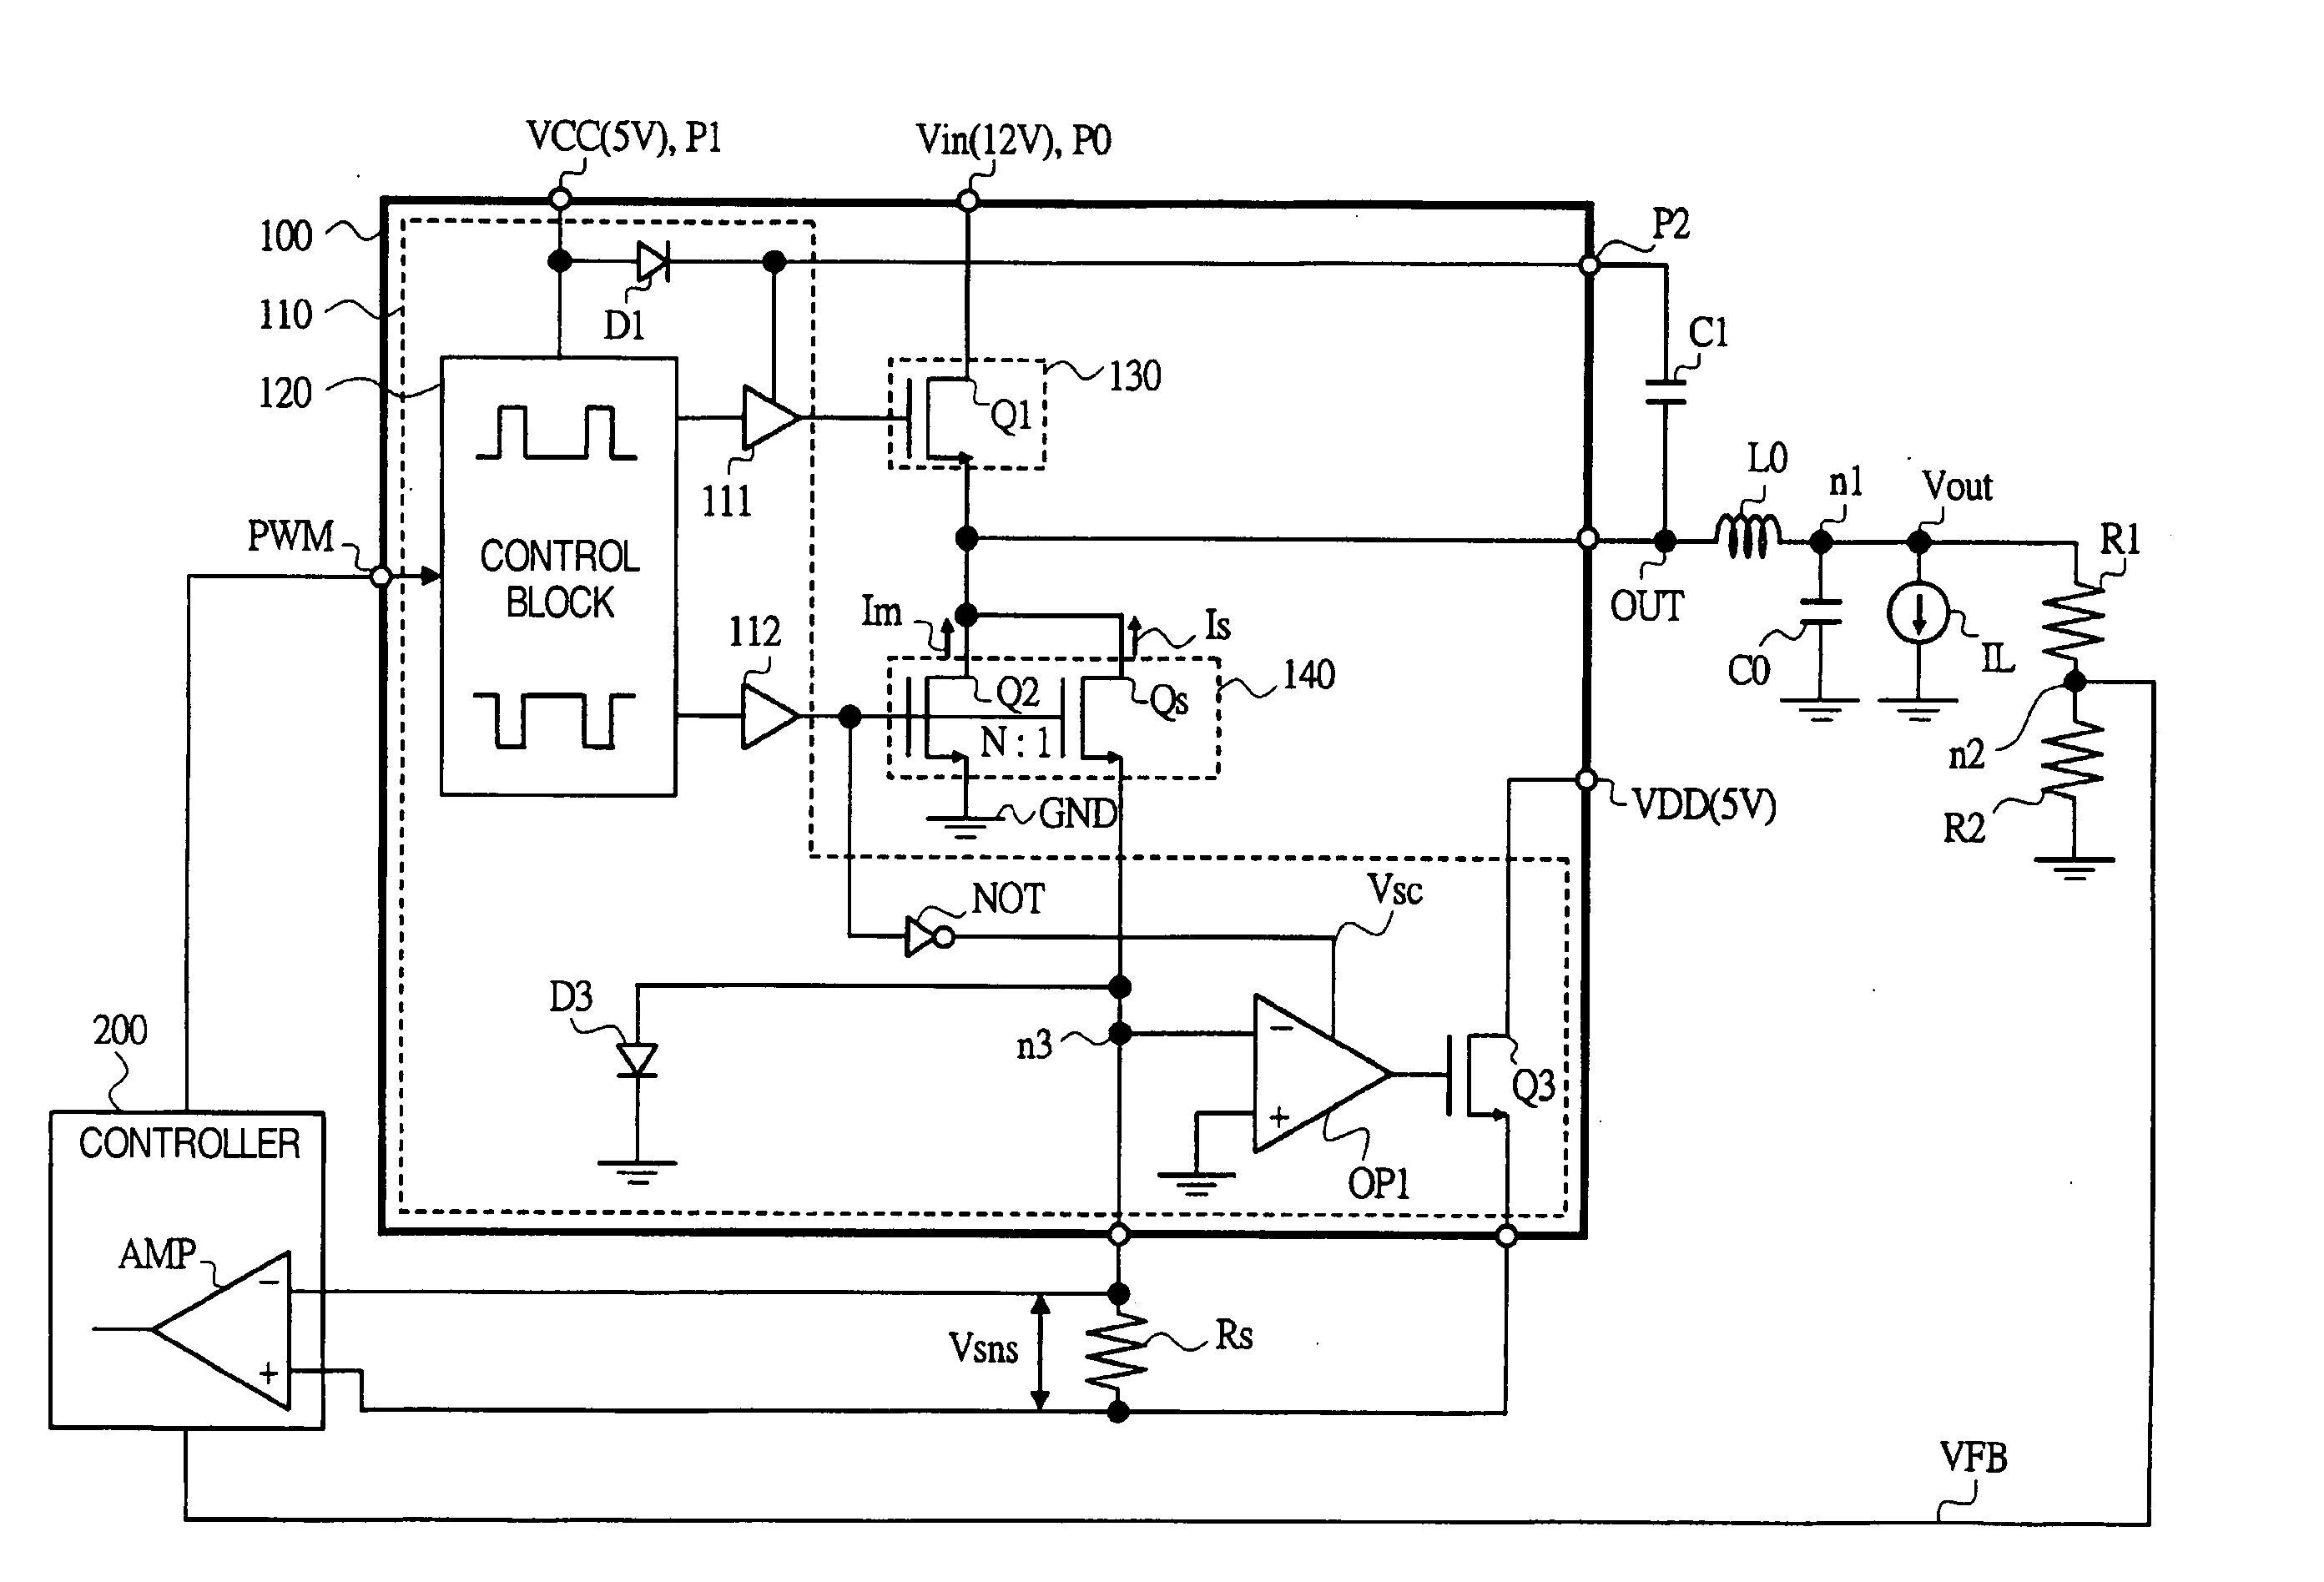 Power supply driver circuit